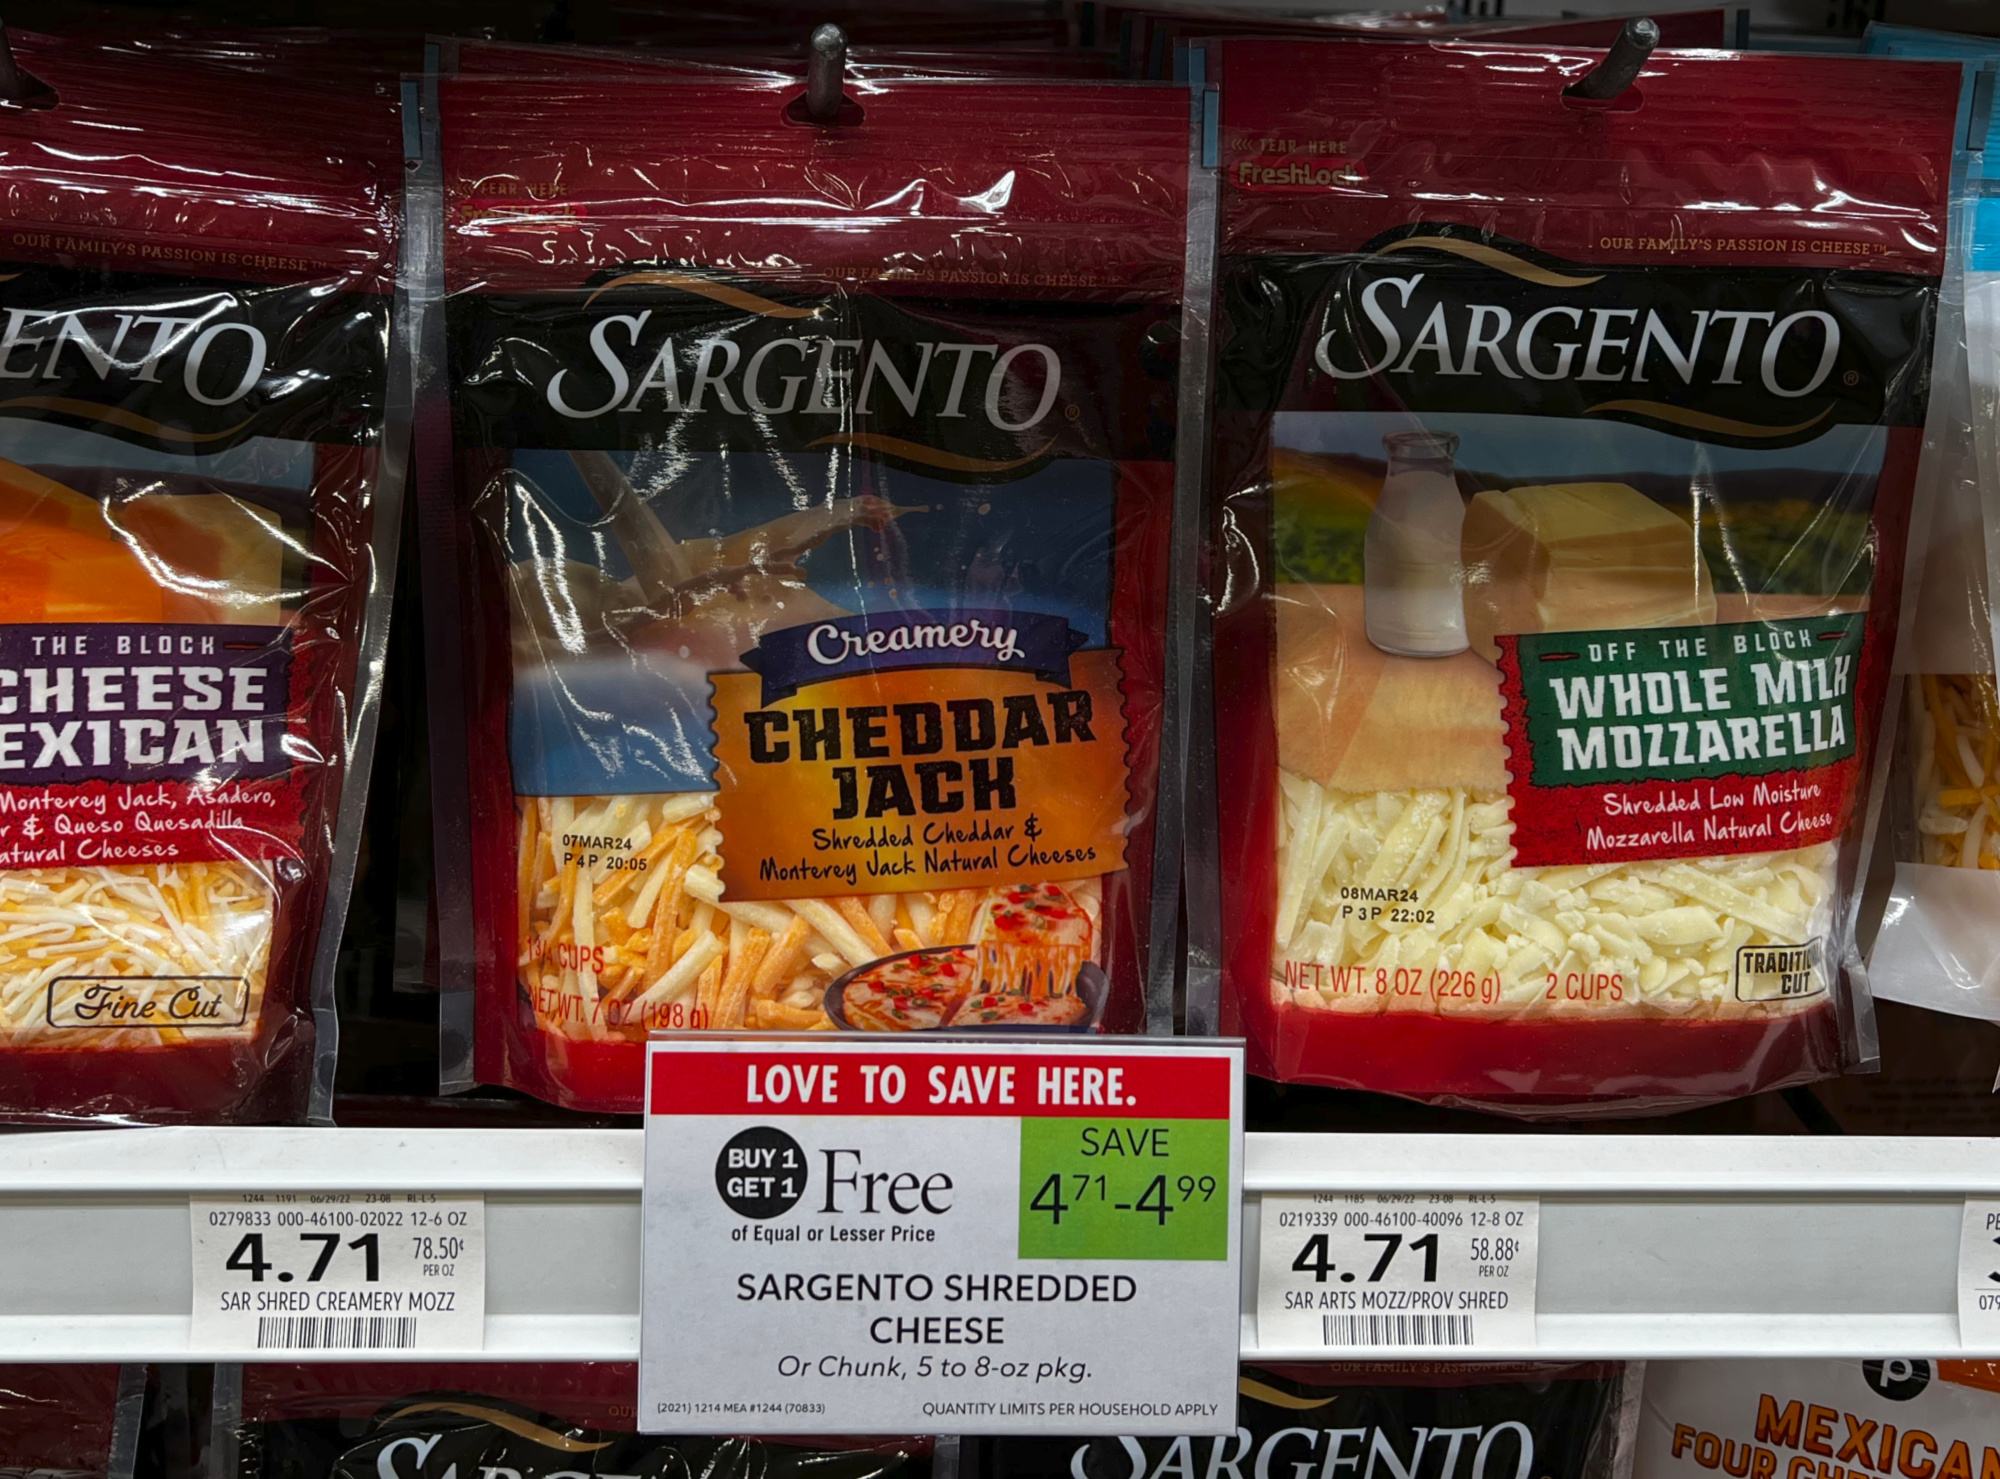 Sargento Shredded Cheese As Low As $1.53 At Publix - iHeartPublix